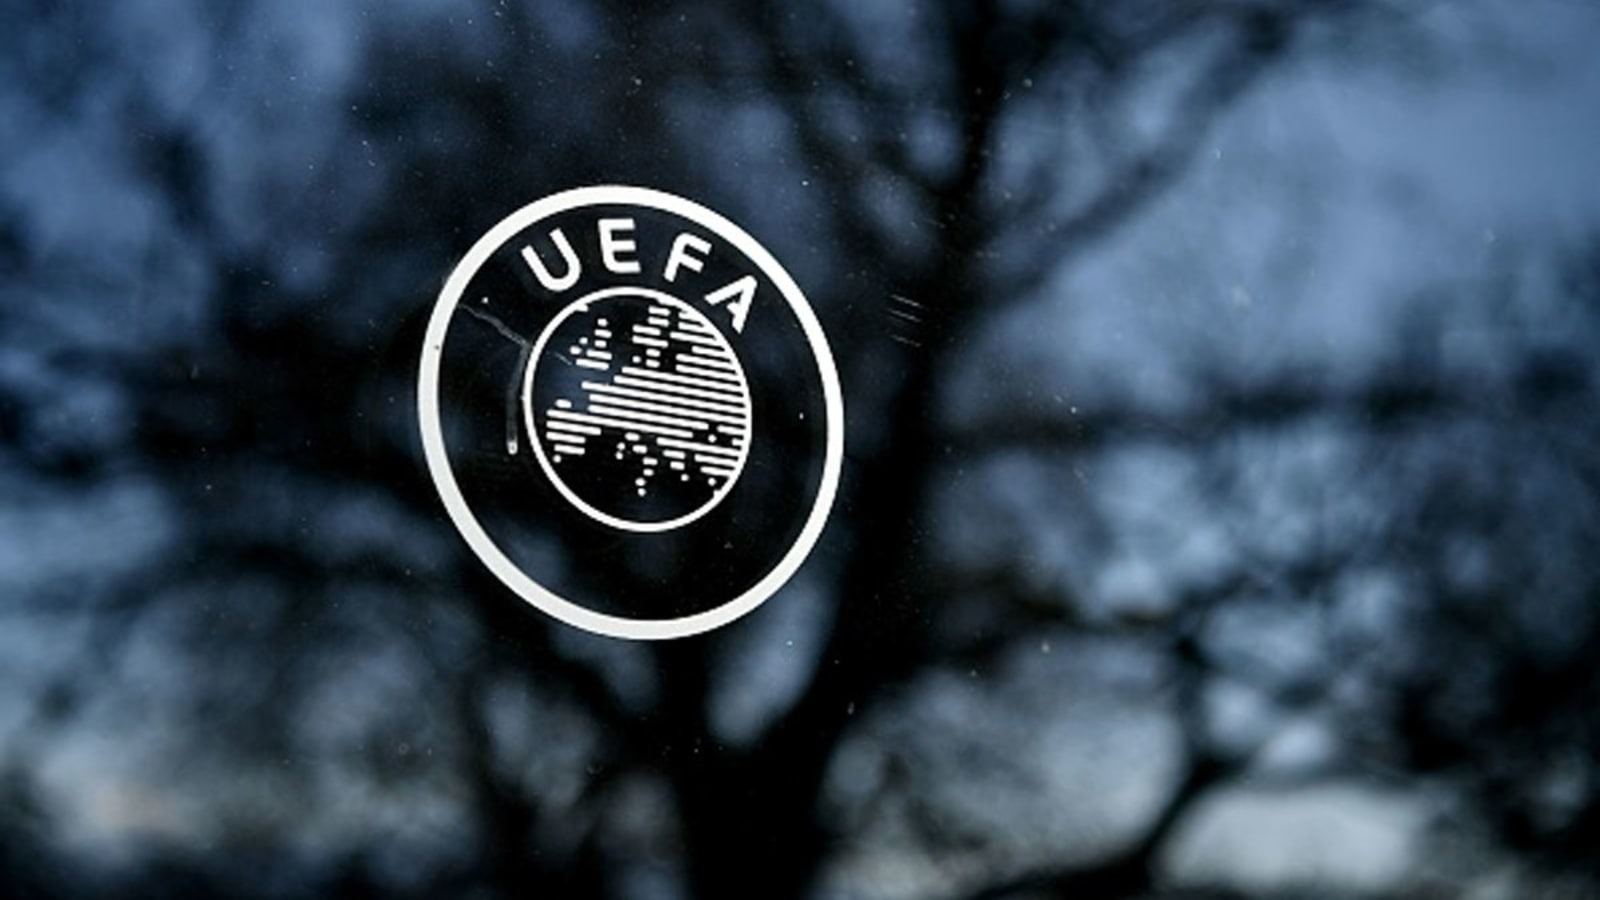 UEFA announces disciplinary action against Barcelona, Real Madrid and Juventus